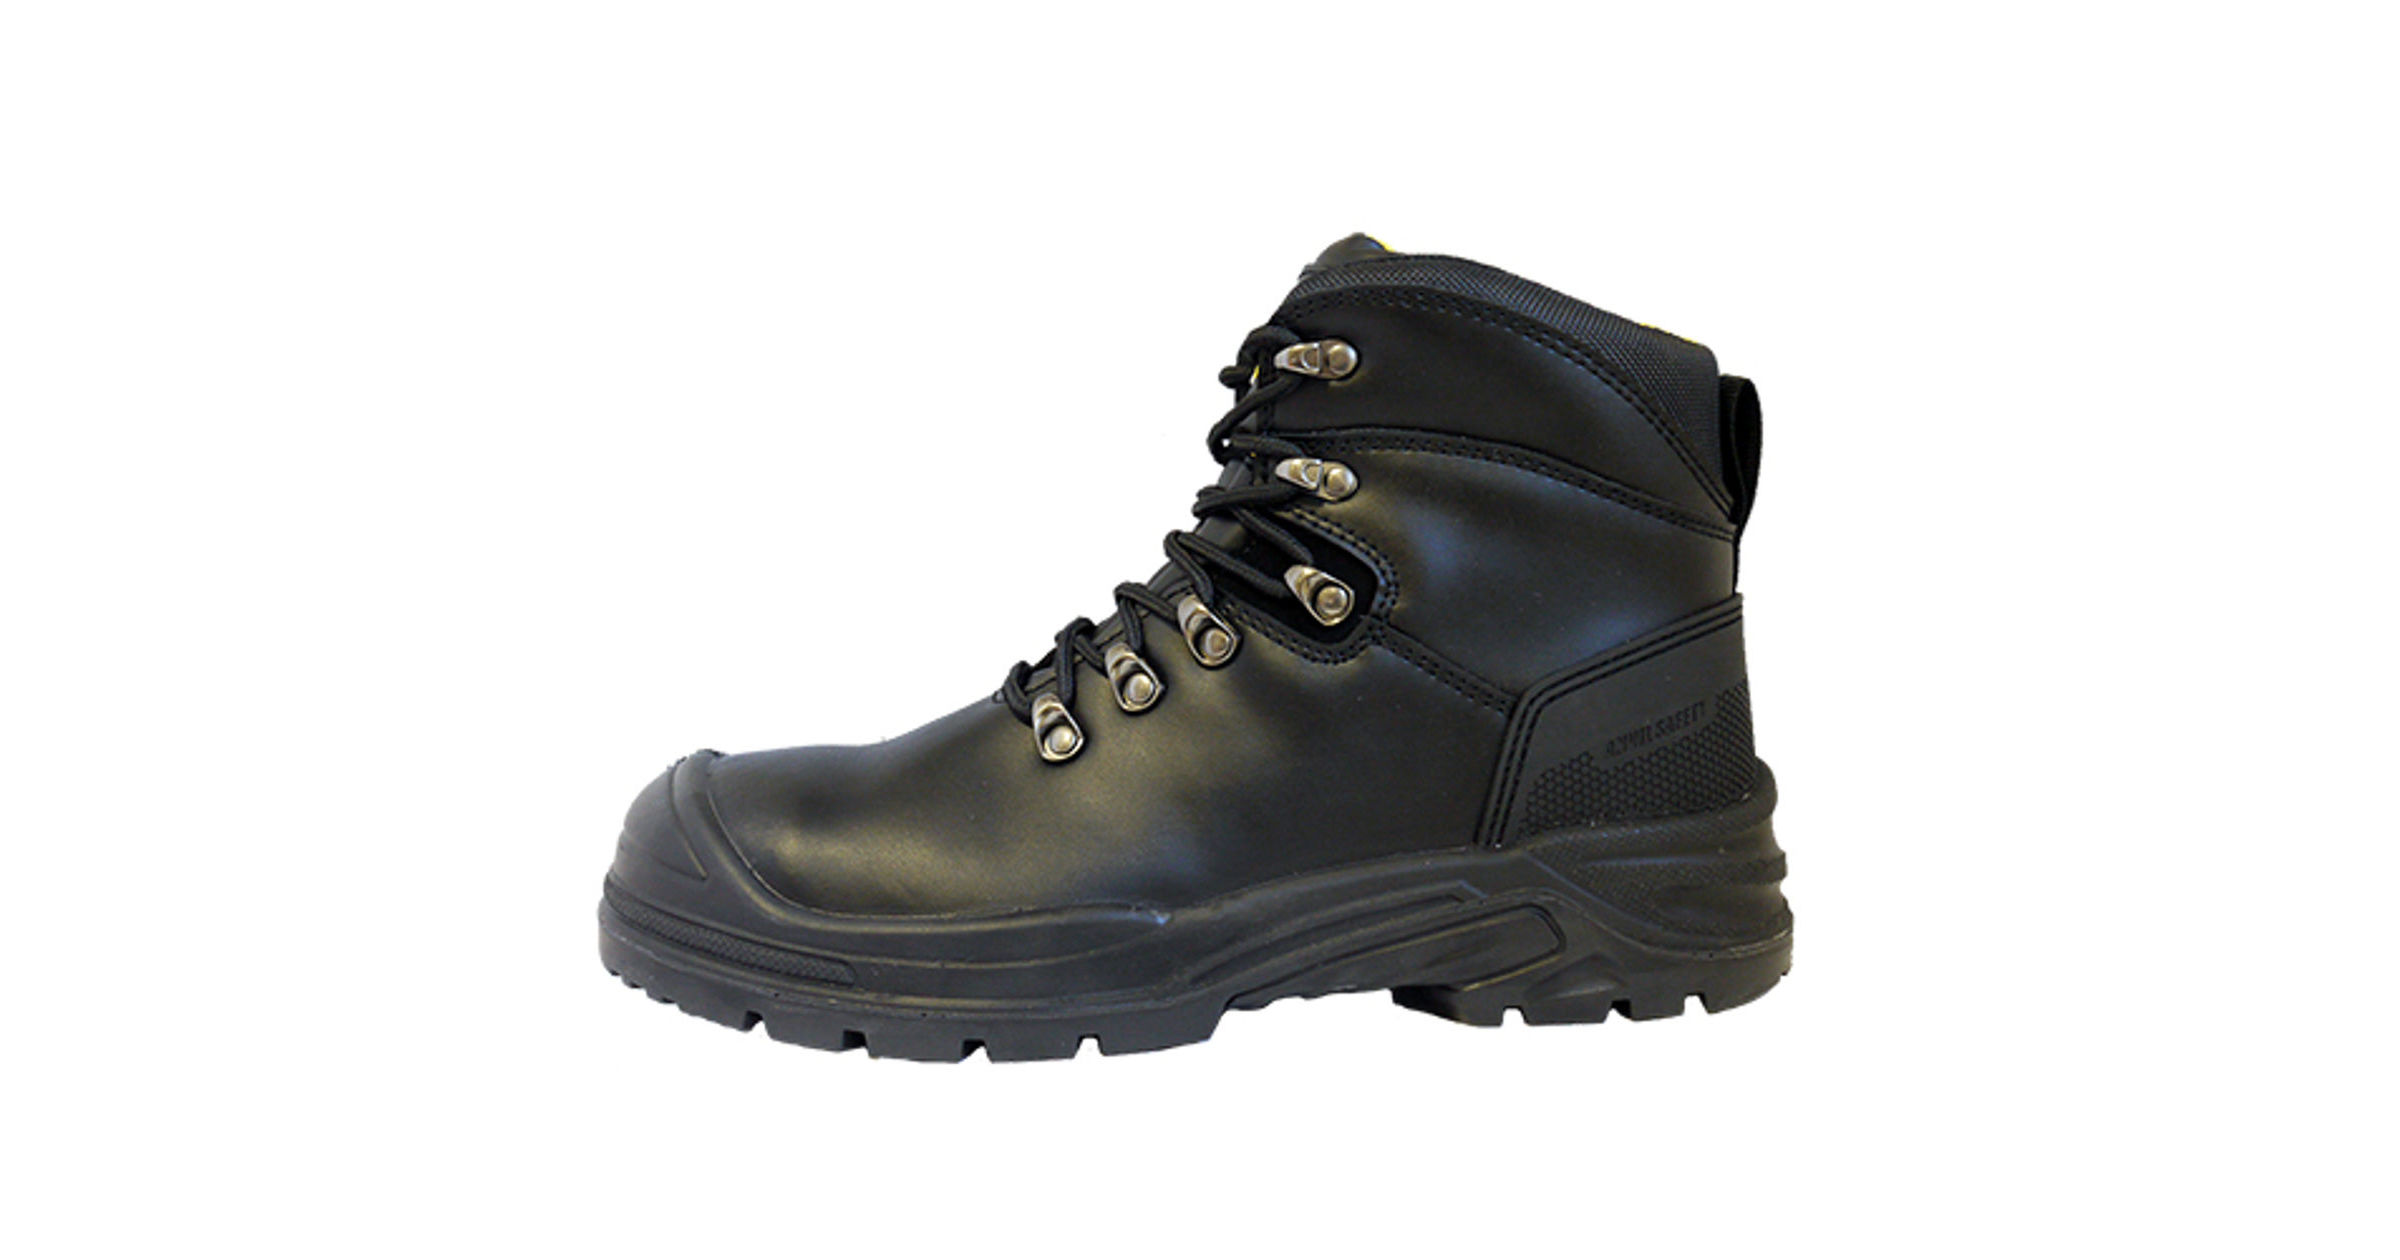 Anvil Safety Bristol S3 SRC Black Leather Steel Toe Cap Wide Fit Safety Boots 